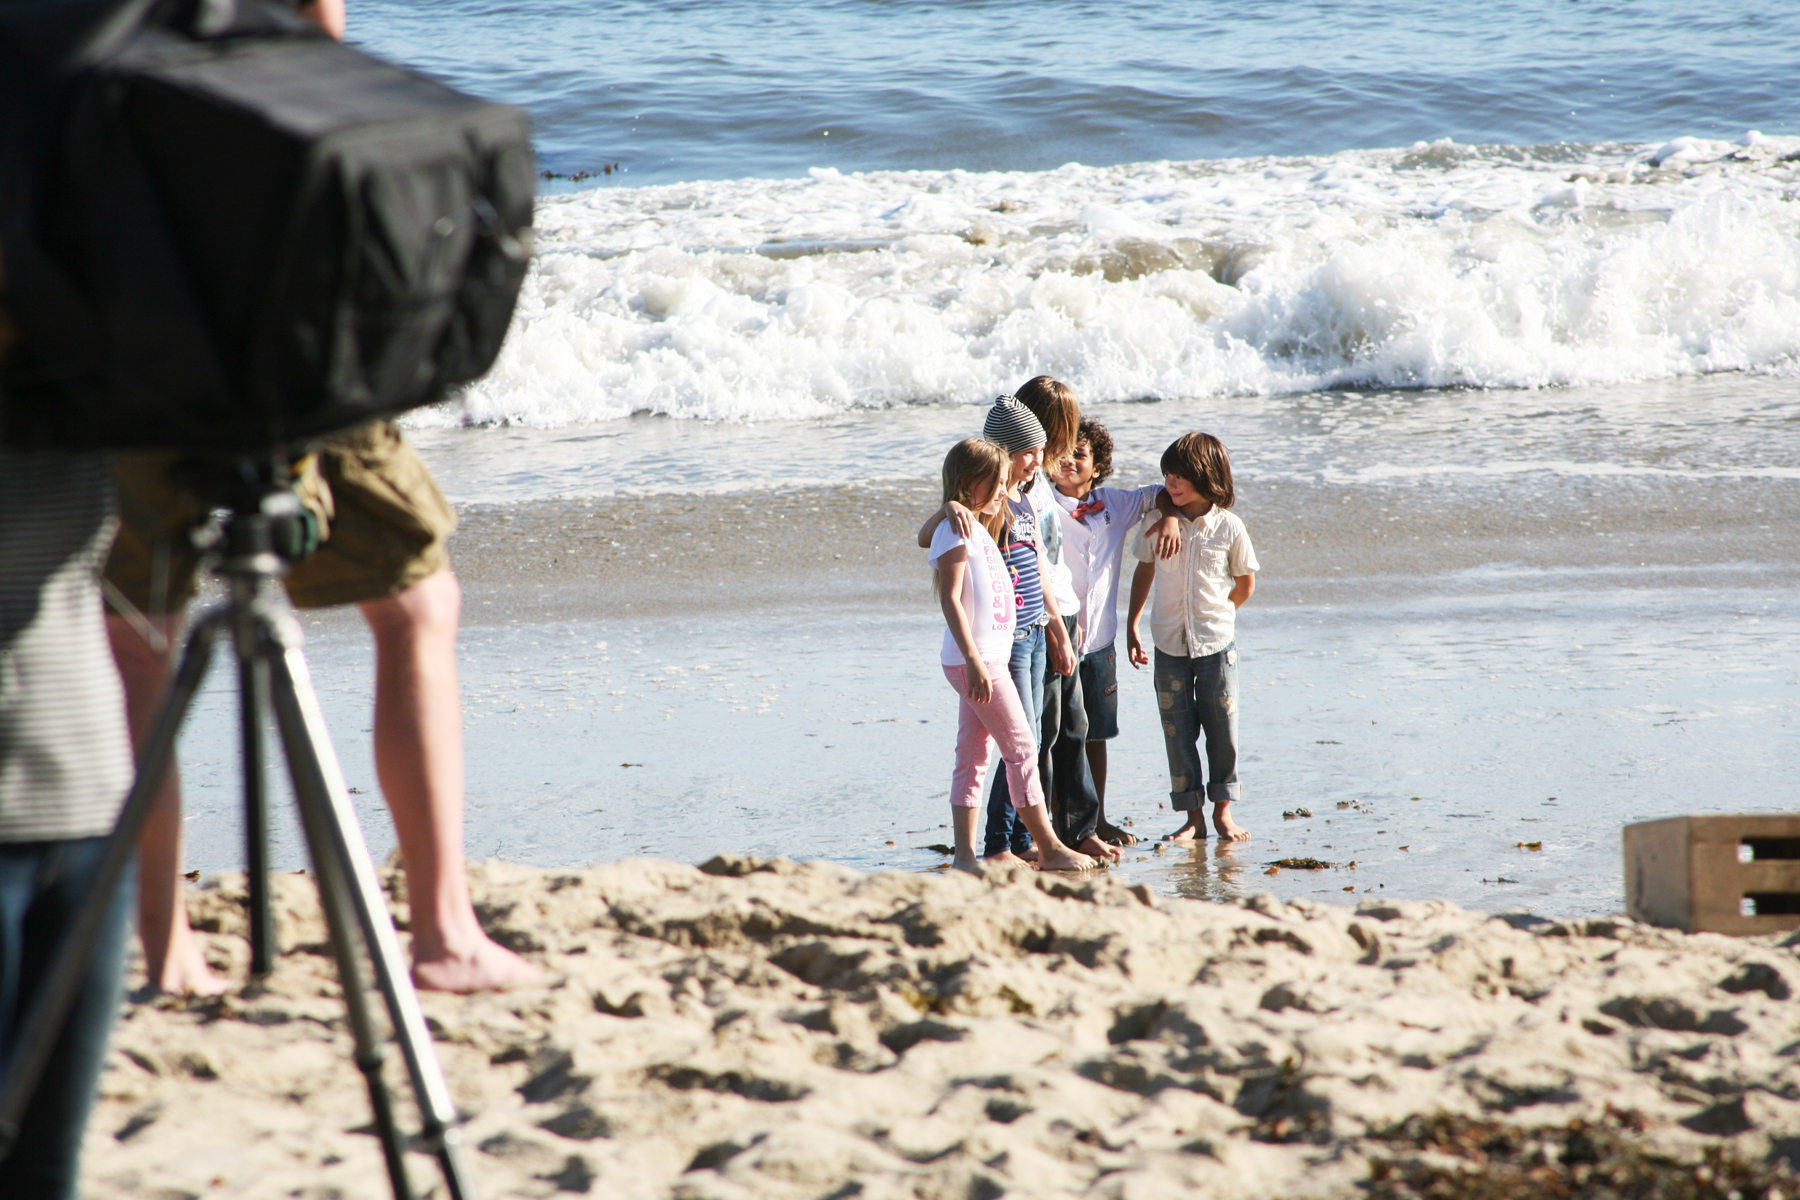 BEHIND THE SCENES FOR GUESS KIDS SPRING 2011 CAMPAIGN